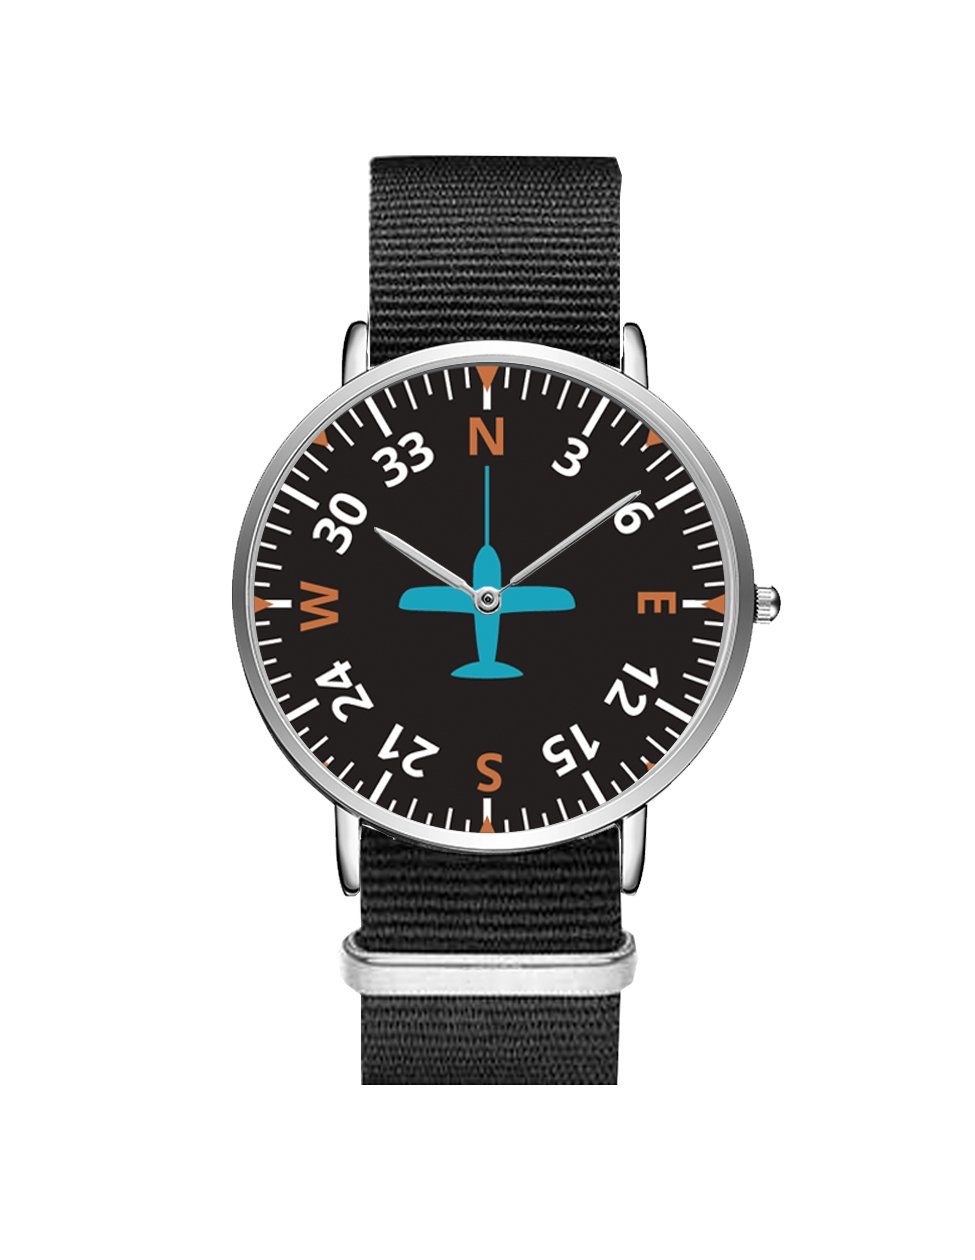 Airplane Instrument Series (Heading2) Leather Strap Watches Pilot Eyes Store Silver & Black Nylon Strap 